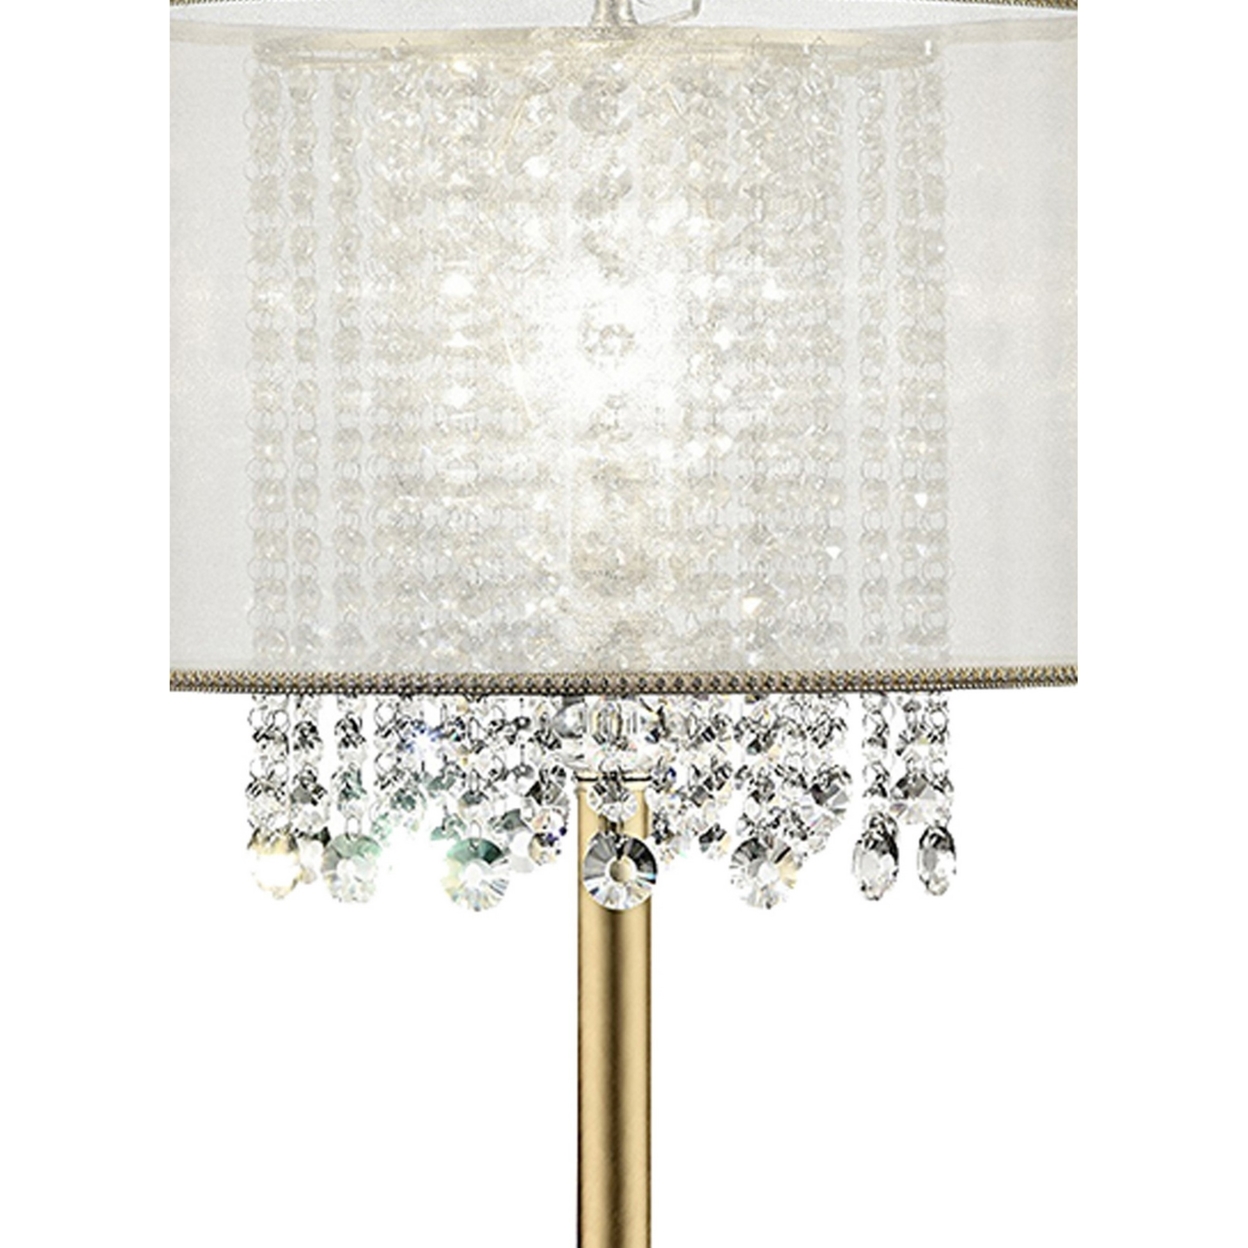 Table Lamp With Hanging Crystal Accents, White And Gold- Saltoro Sherpi